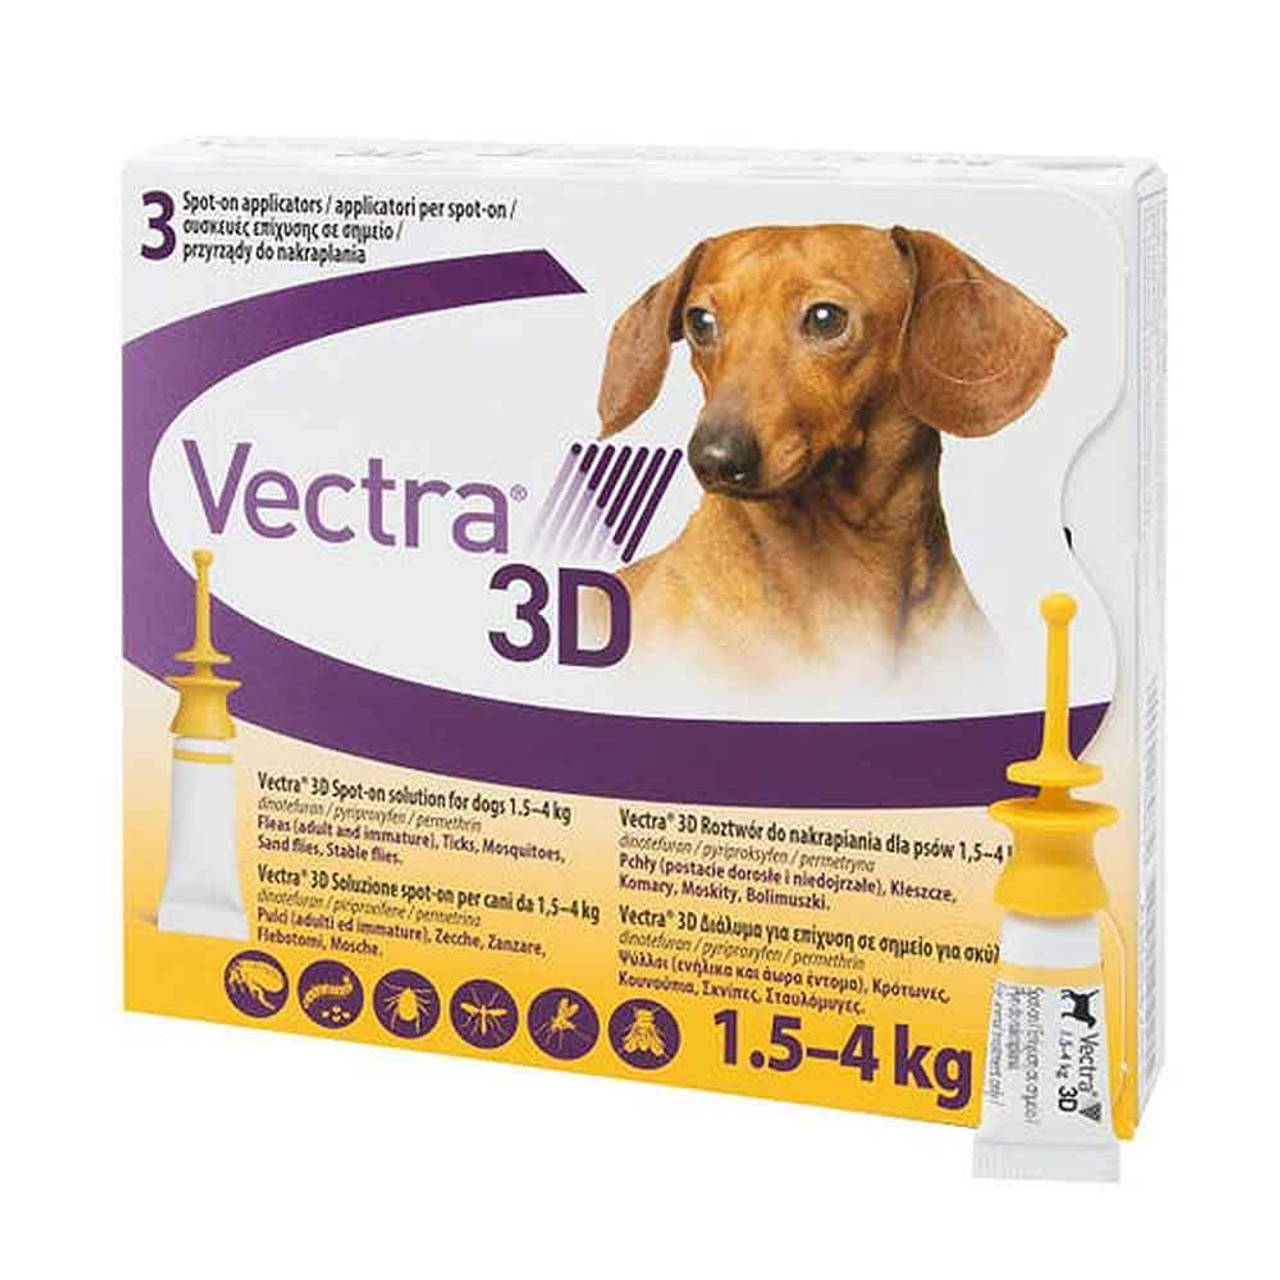 Vectra 3D For Extra Small Dogs 1.5-4 kg (5-10 lbs) | Unitedpetworld.Com